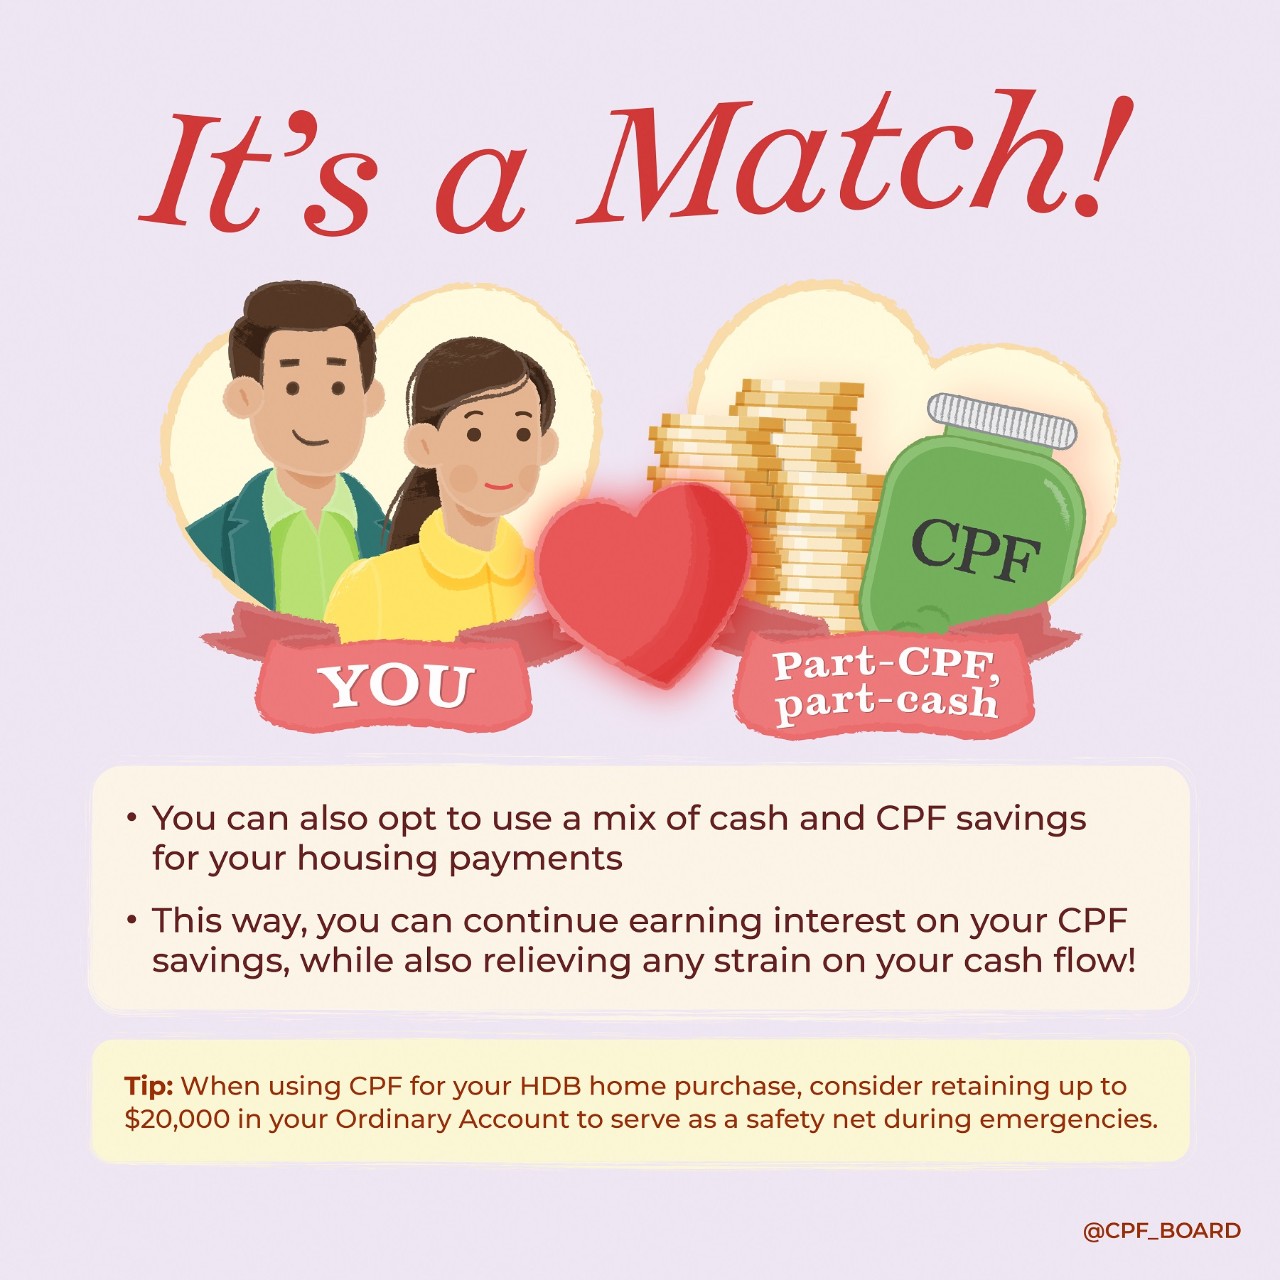 it's a match - consider using a mix of cash and CPF savings for your housing payments